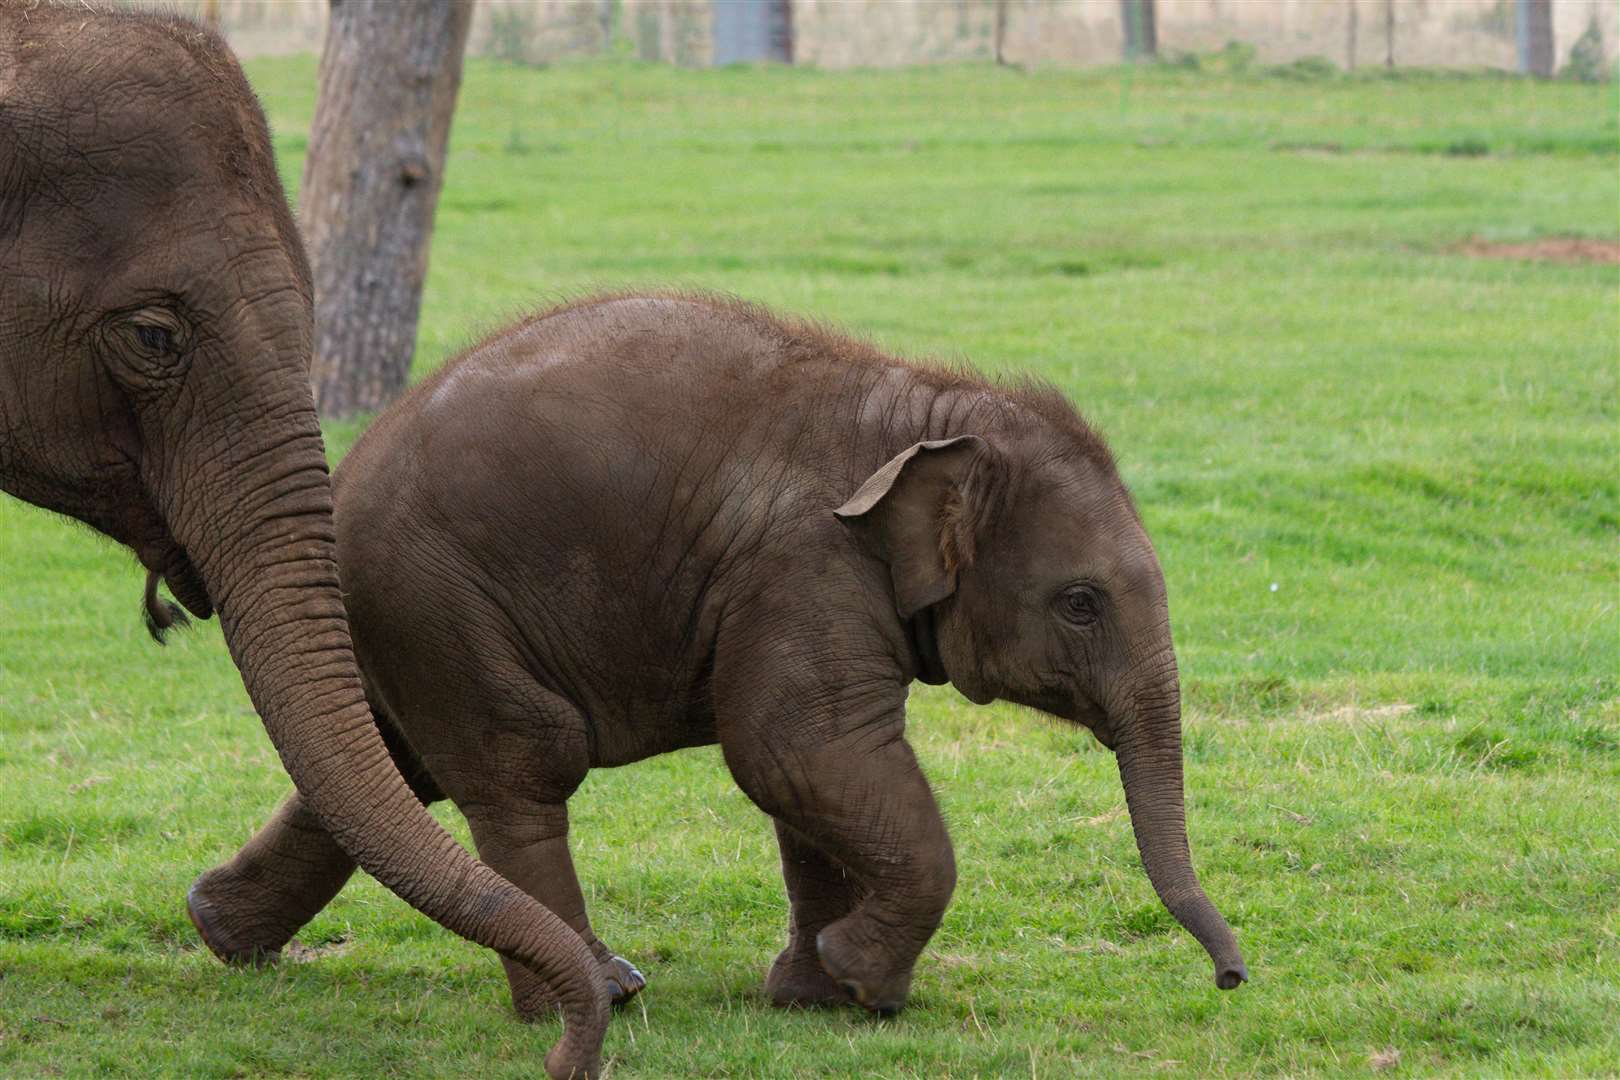 Elephant keeper Stefan Groeneveld said the footage showed 11-month-old Nang Phaya is ‘not ready to grow up just yet’ (Whipsnade Zoo/PA)